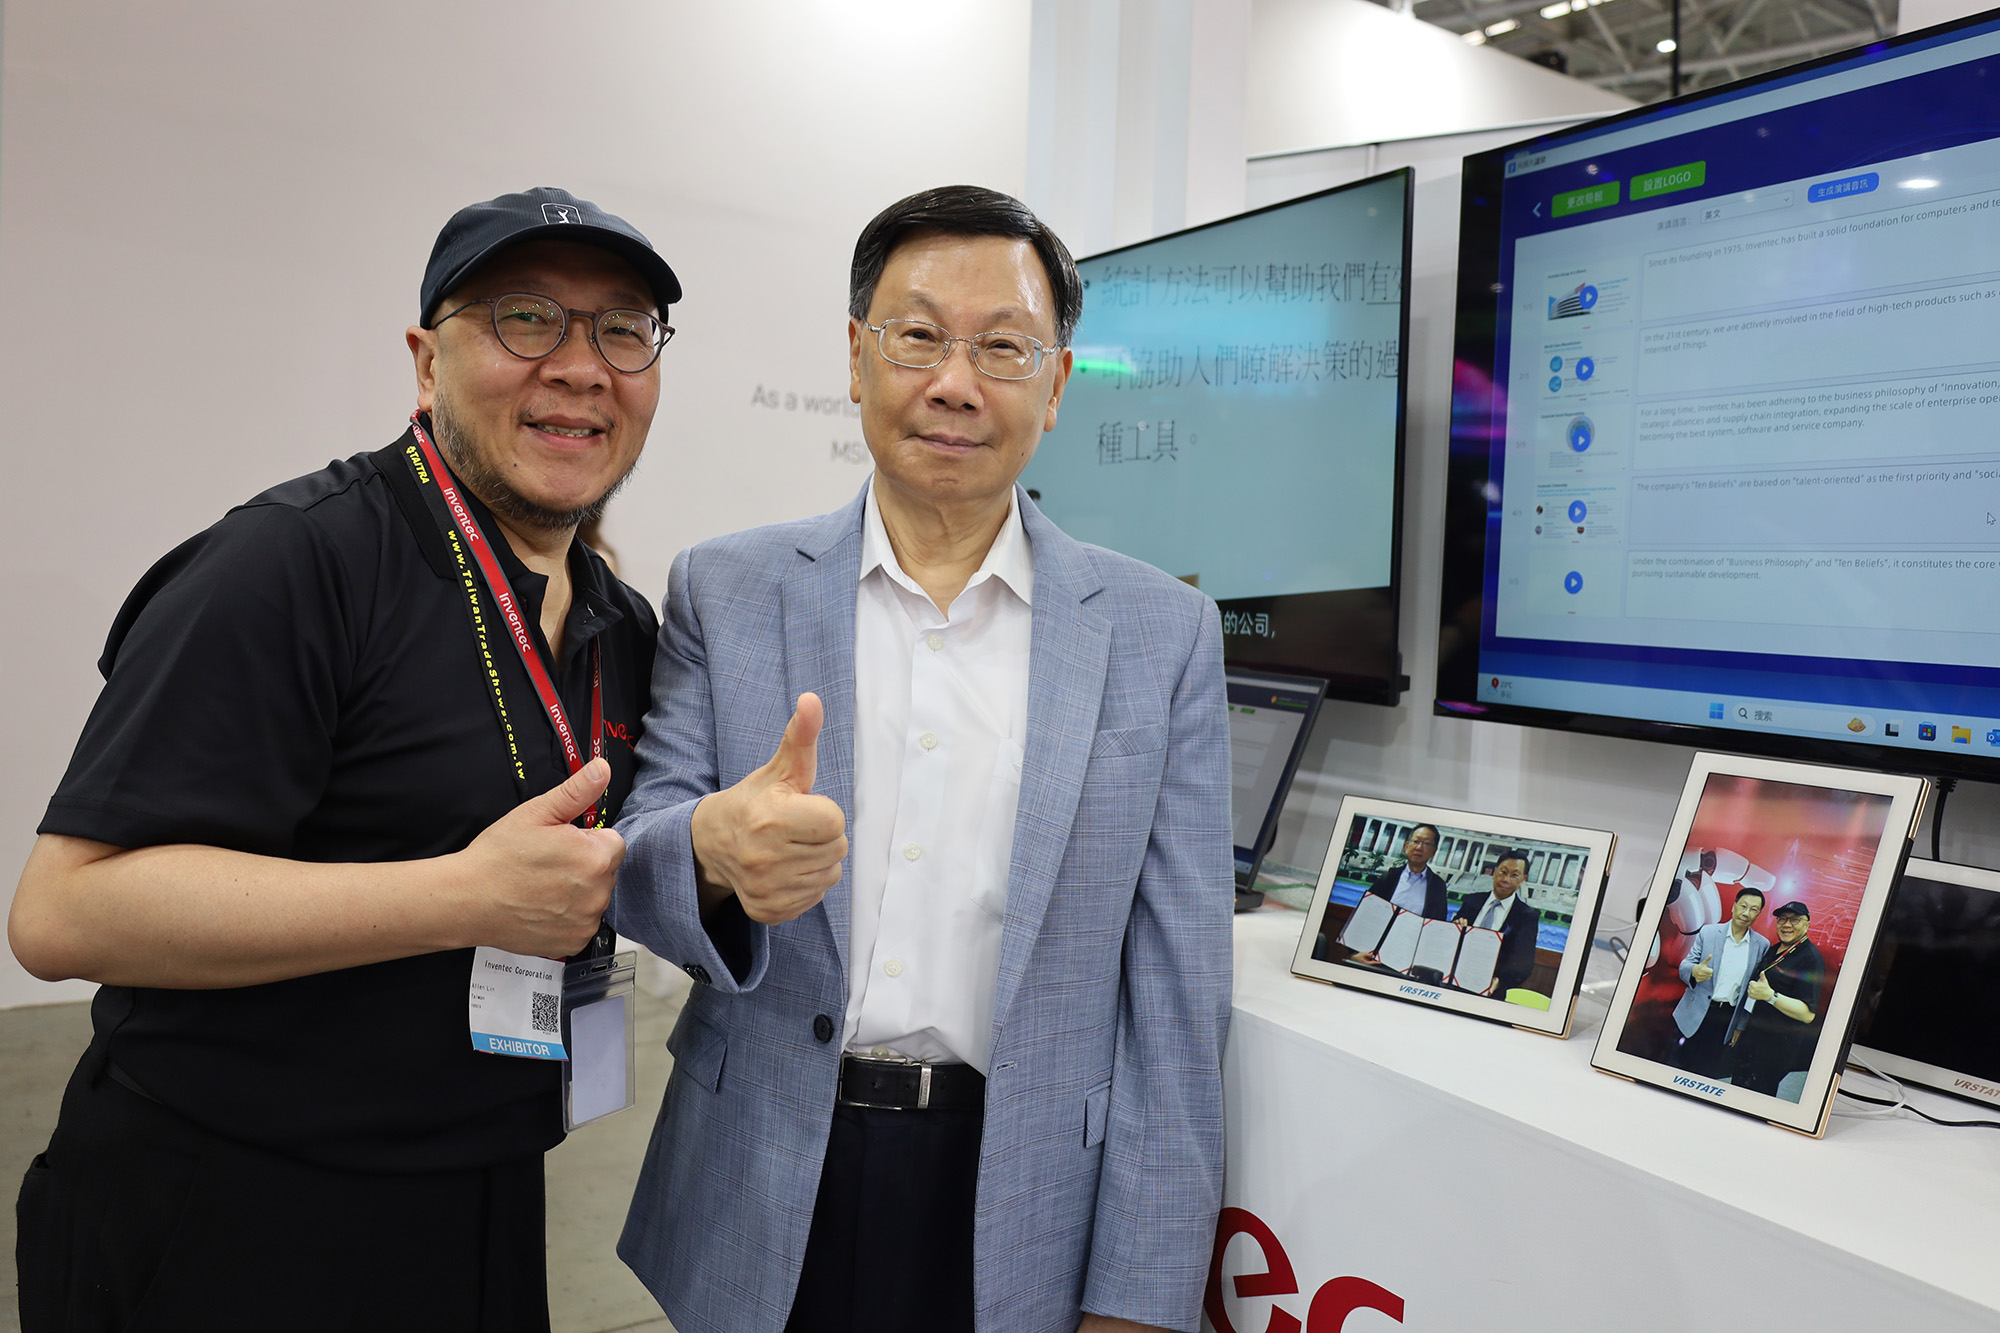 Inventec 's Senior Manager of Metaverse Technology Division, Lin Chao-Liang (left), demonstrating to Asia University President Jeffrey J.P. Tsai (right) the technology that allows for instant 3D image generation using a mobile phone